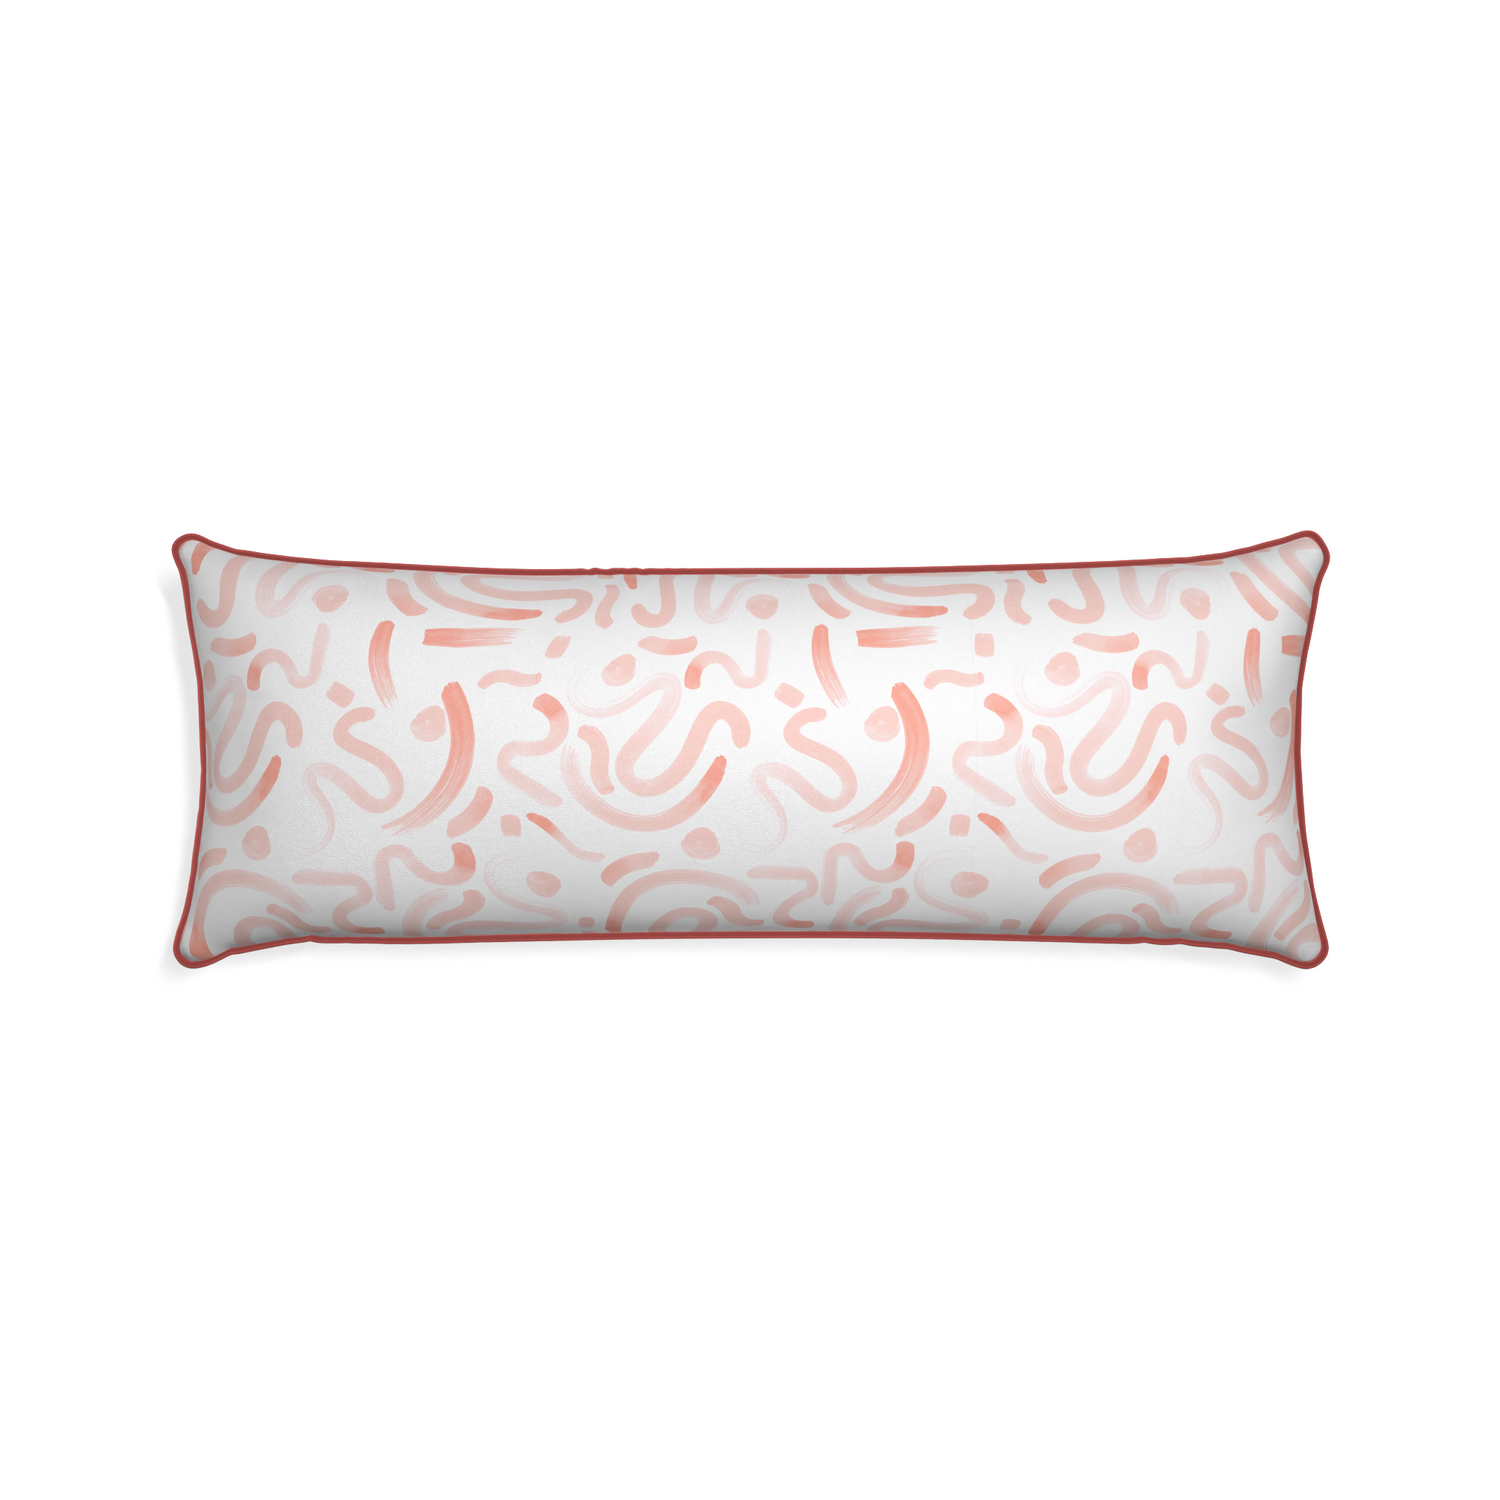 Xl-lumbar hockney pink custom pink graphicpillow with c piping on white background